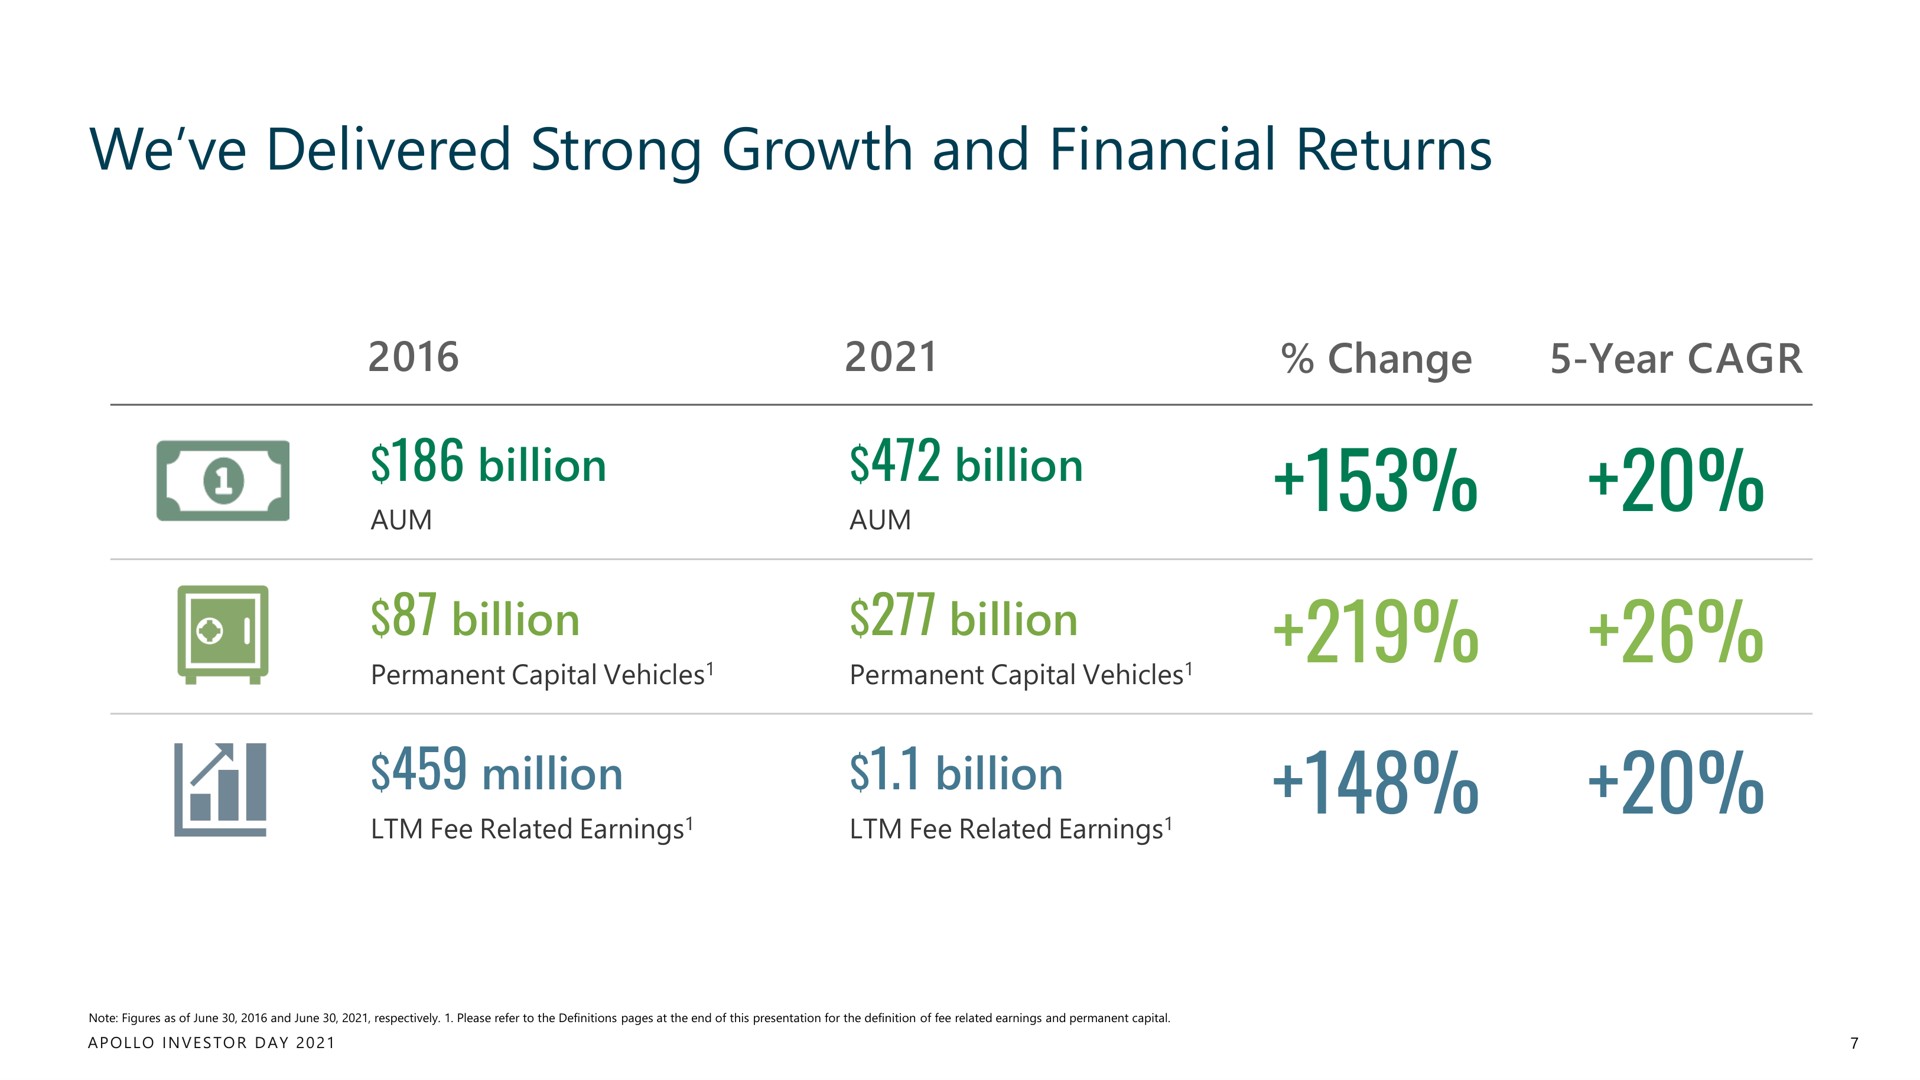 we delivered strong growth and financial returns billion | Apollo Global Management